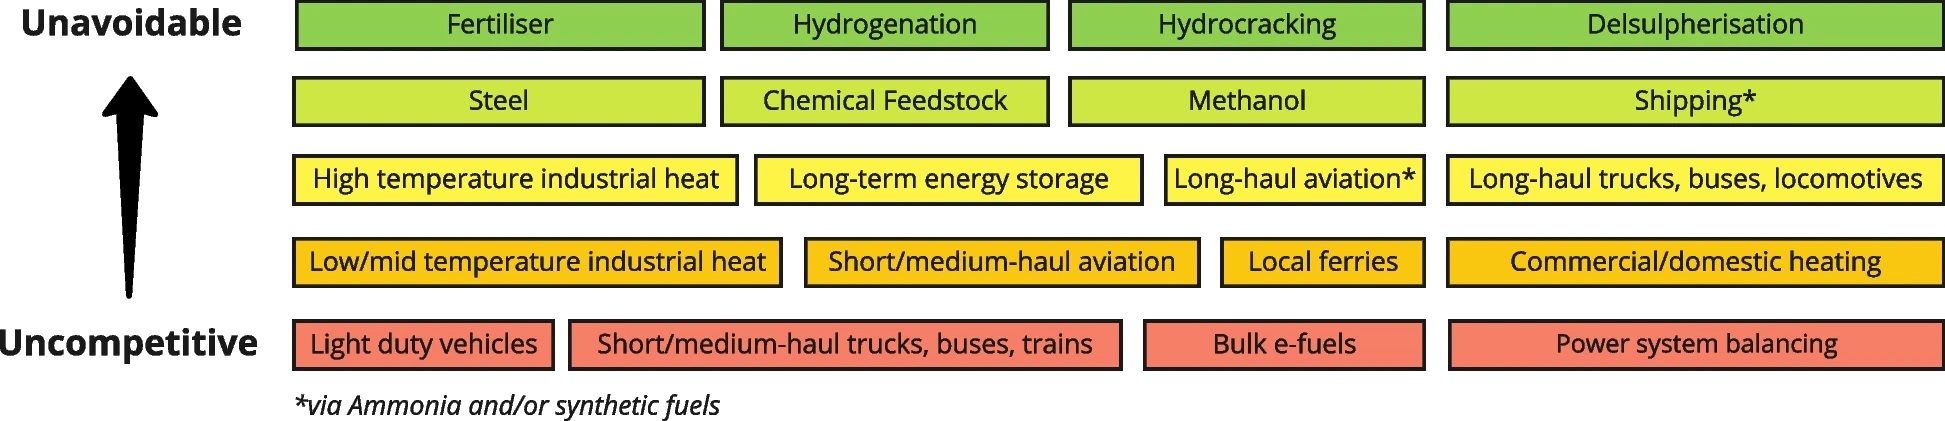 List of various hydrogen applications ranging from inevitable to green, non-competitive to red